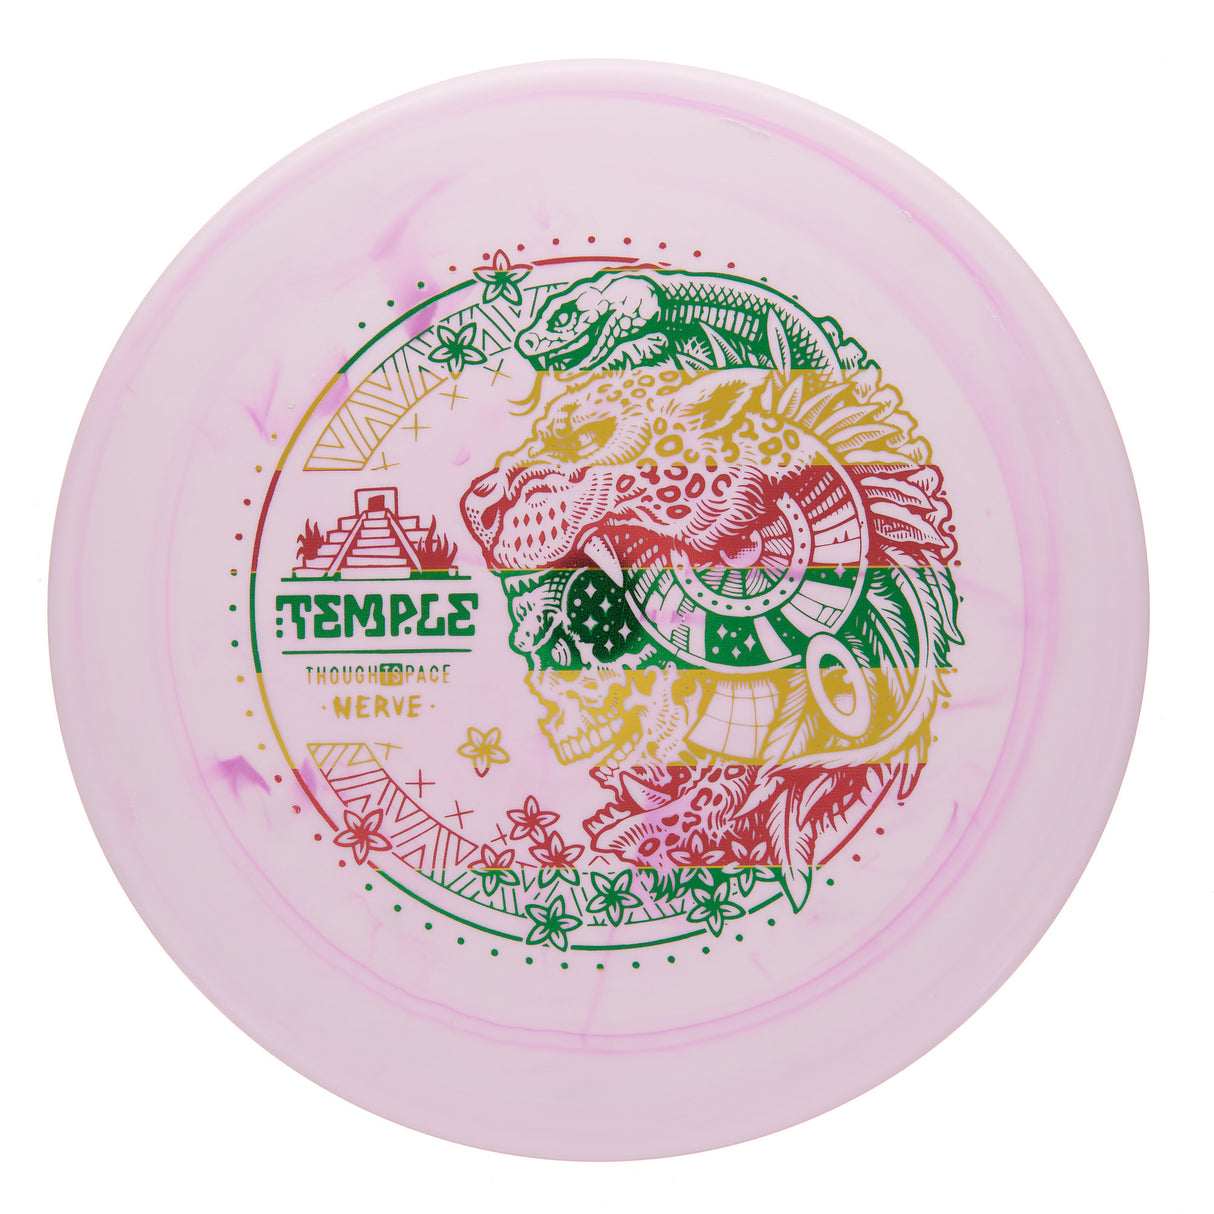 Thought Space Athletics Temple - Test Blend Nerve 174g | Style 0019